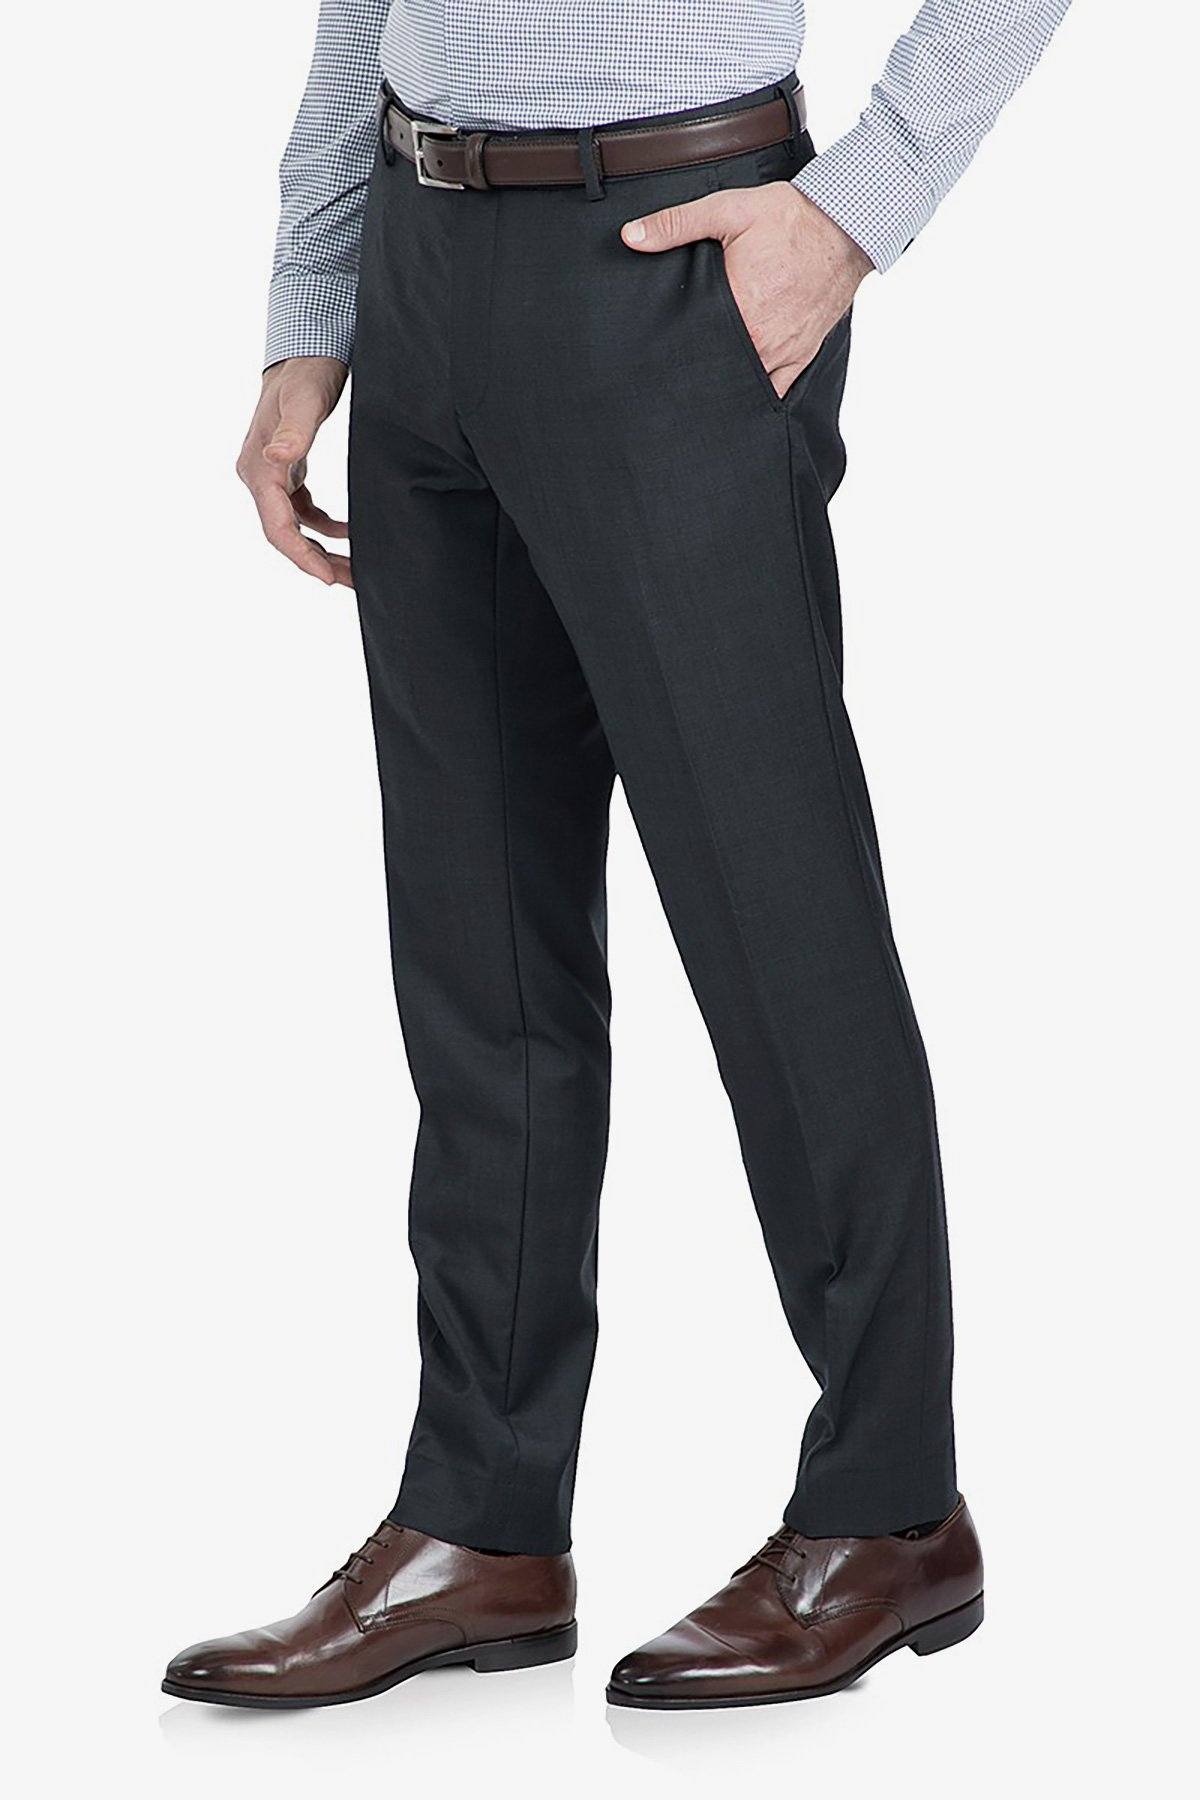 Suits - Gibson Caper Trouser Fup518 - Ballantynes Department Store